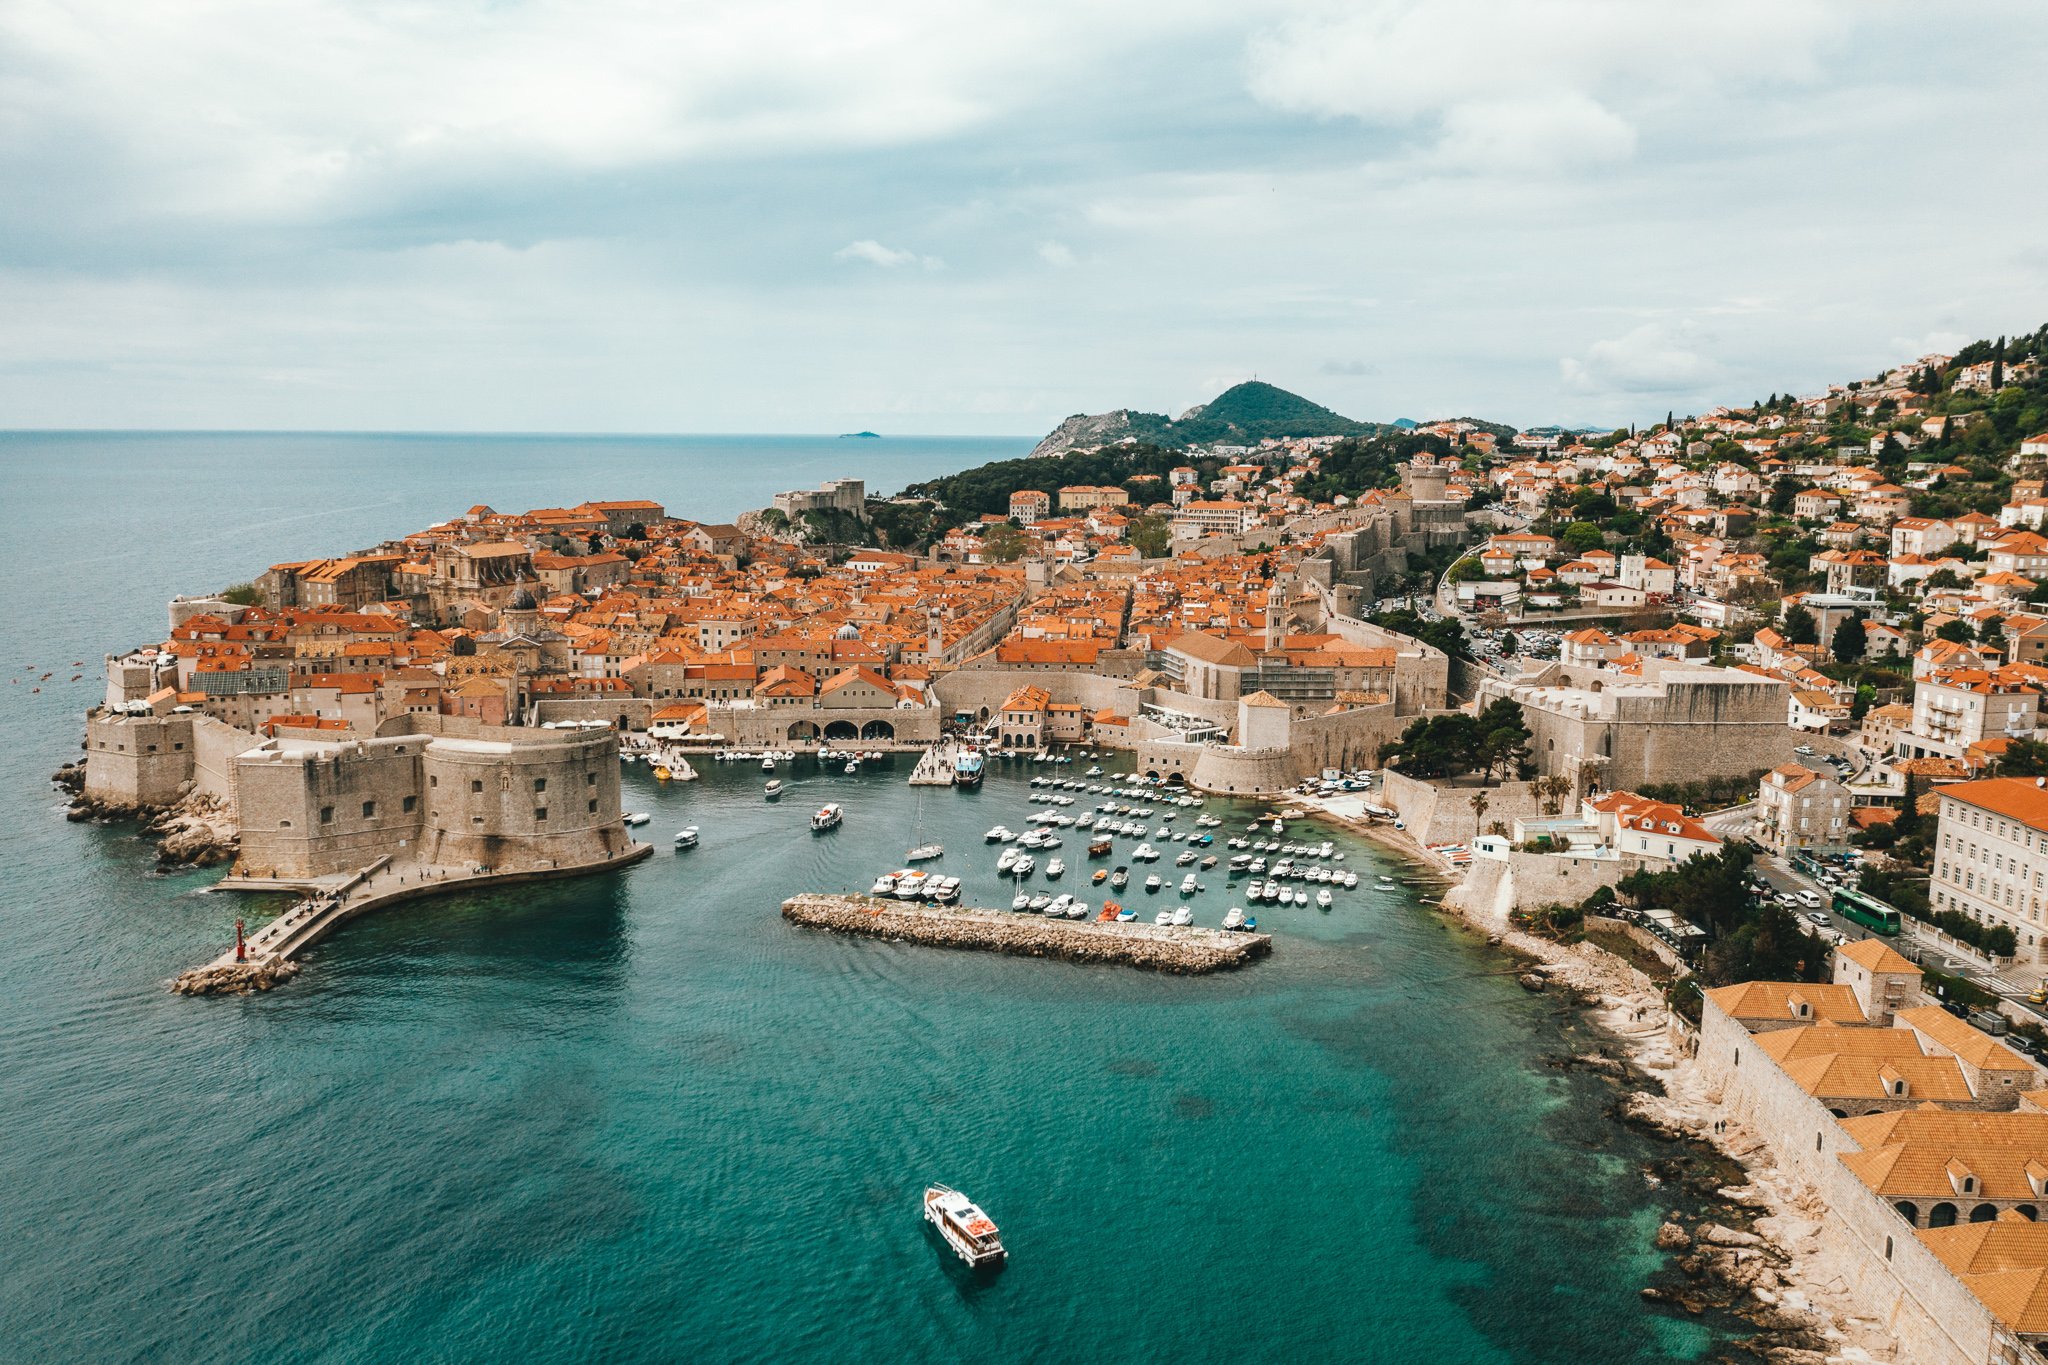 TrovaTrip view of Dubrovnik Croatia with houses on an island sitting on greenish blue waters with boats 